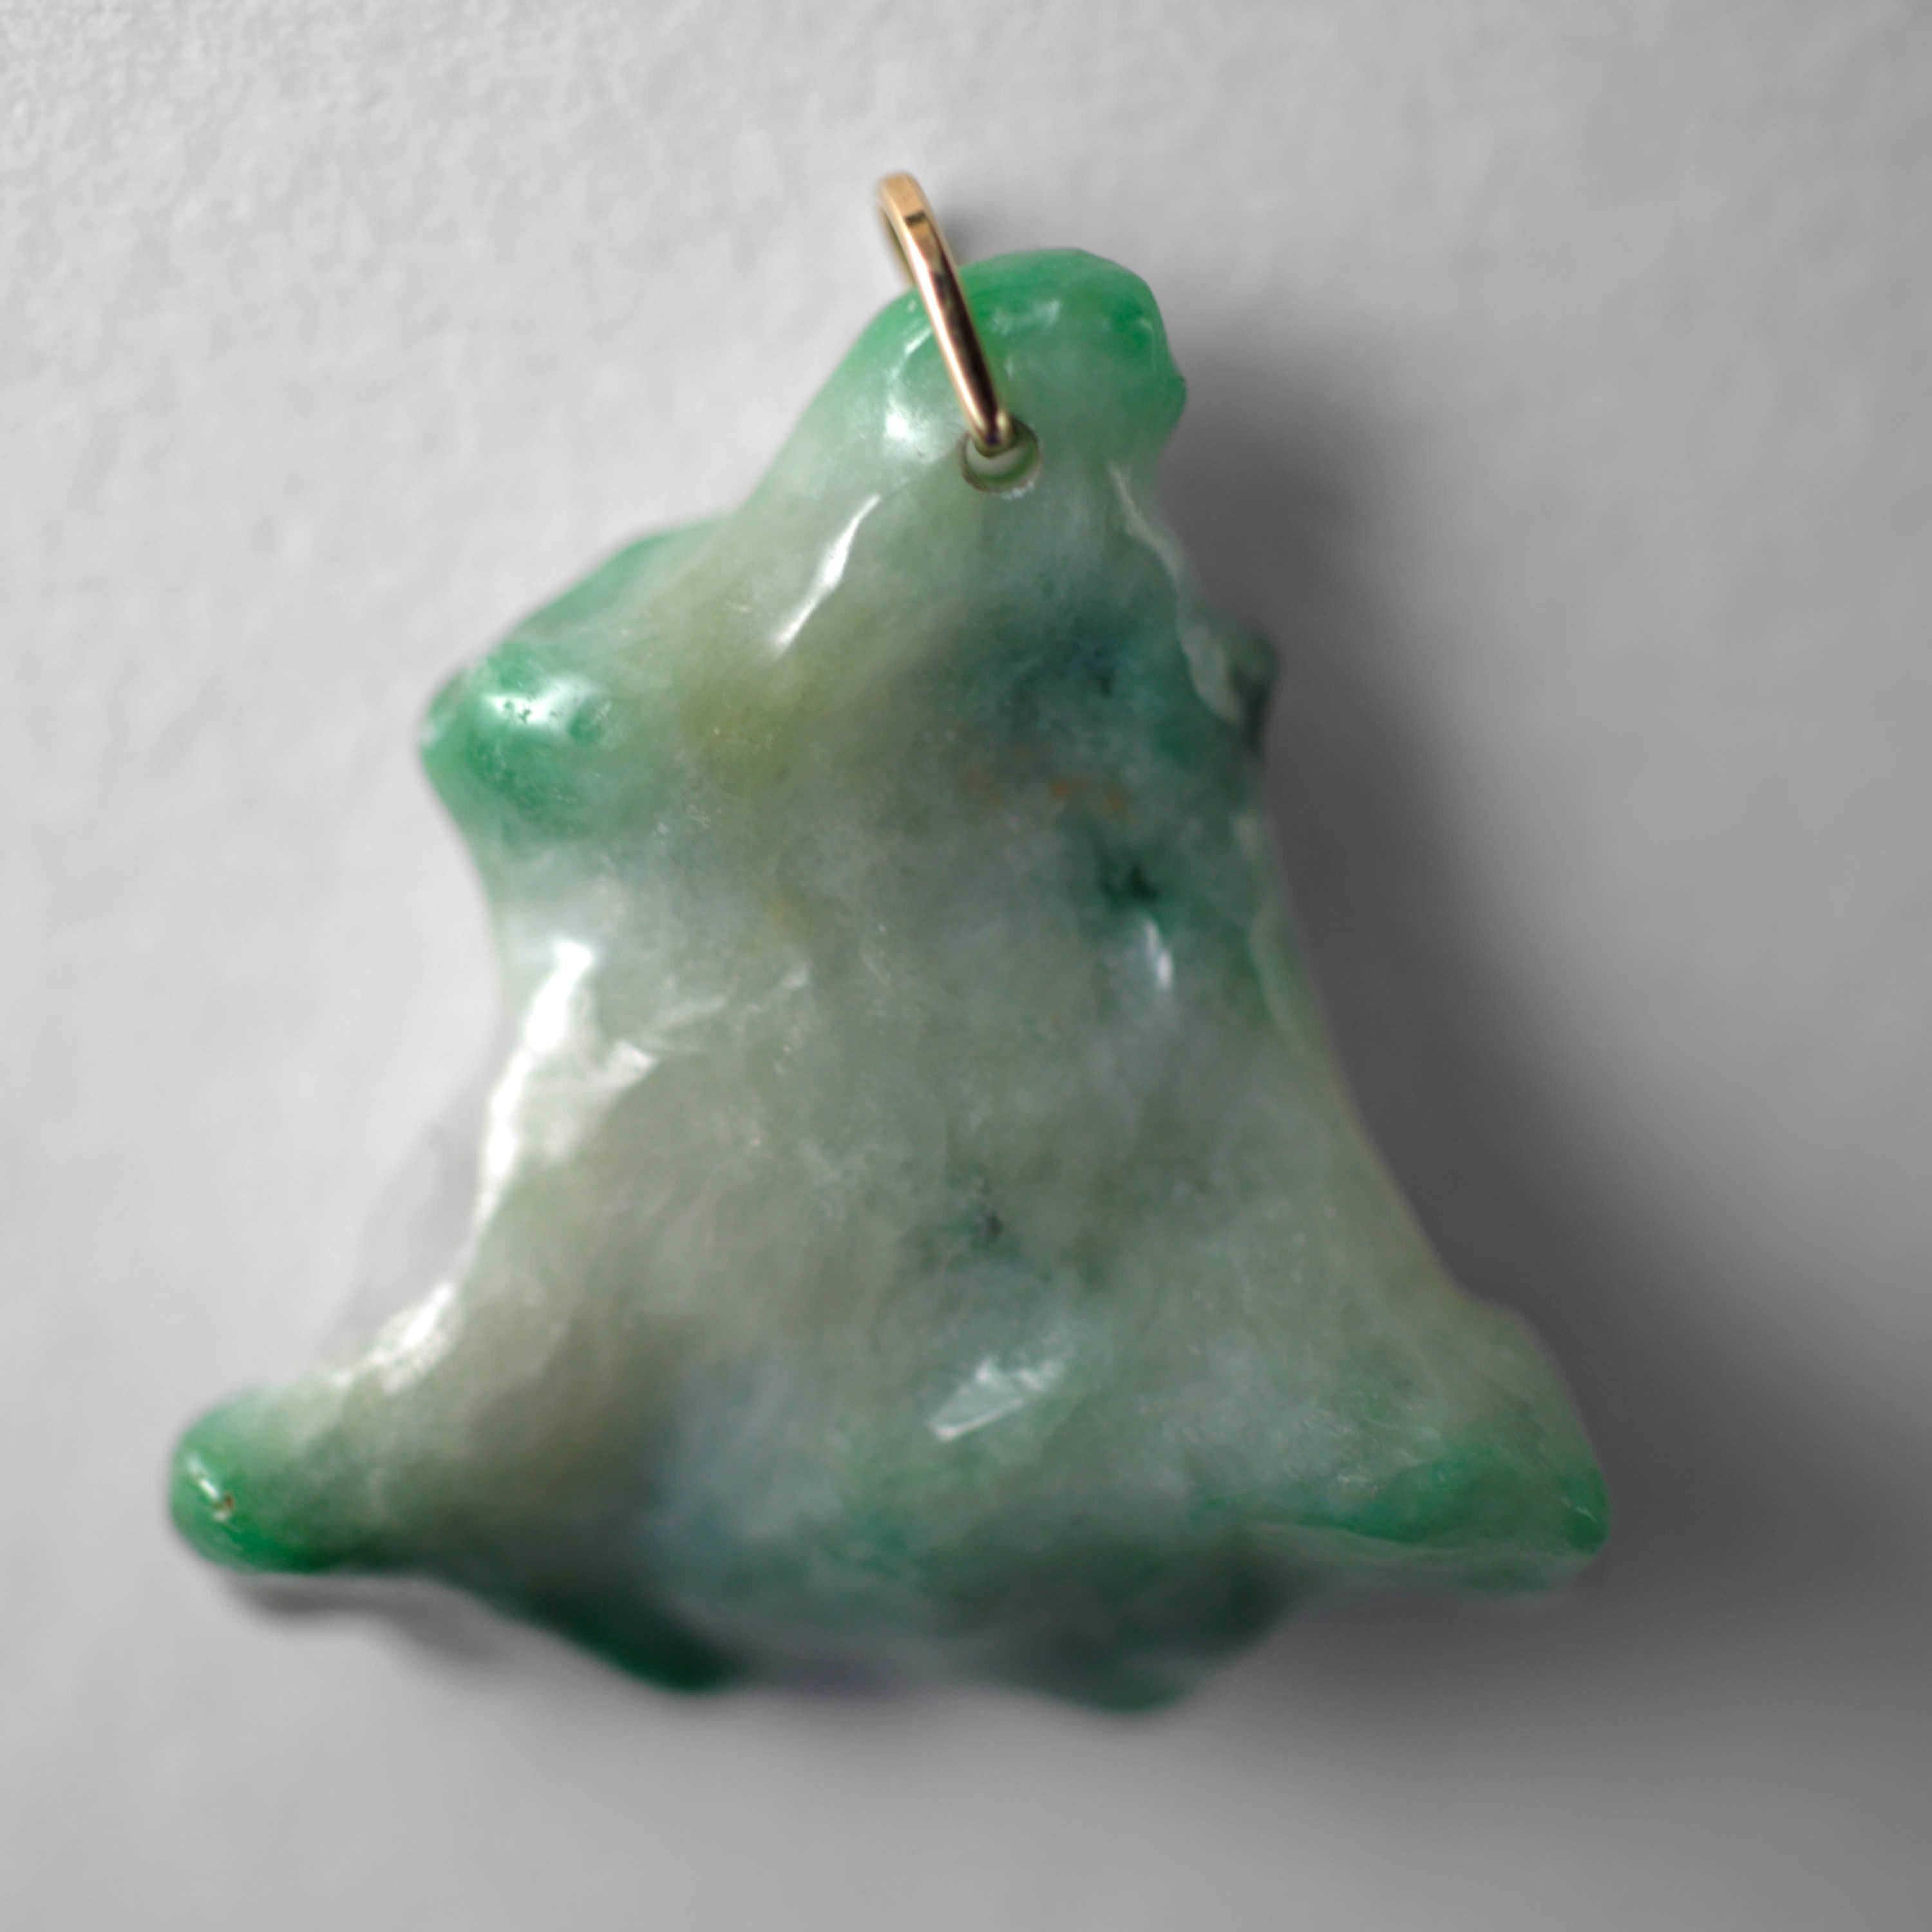 Artisan Rich Jadeite Jade Pendant Freeform Carving Certified Untreated, New For Sale